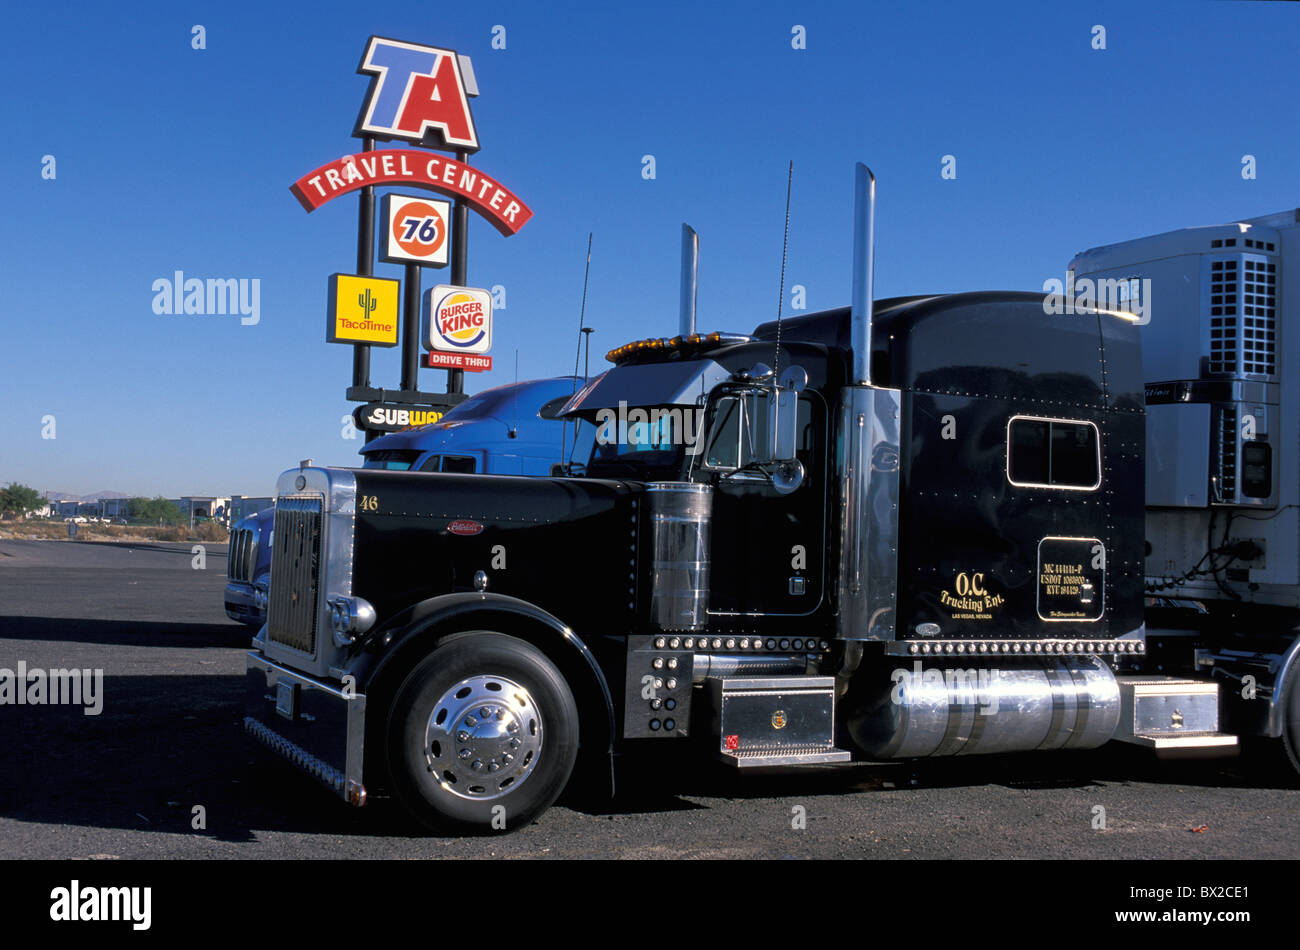 Truck Truck stop resting place TRUCK parking lot motorway service area California USA United States America Stock Photo